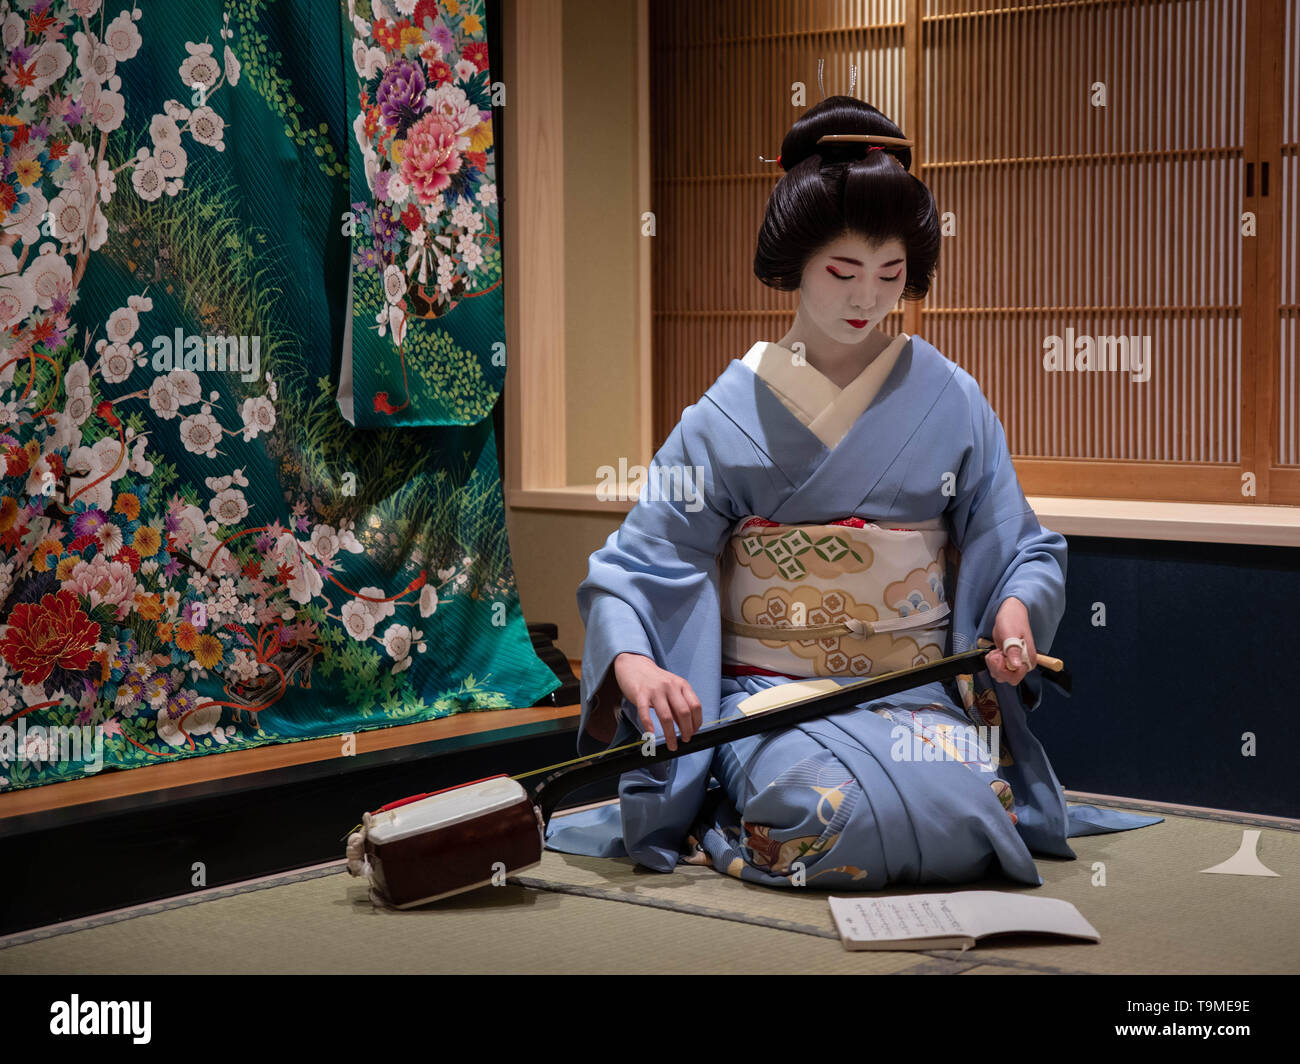 Kyoto, Japan - May 19, 2019: Young geisha in training, called a maiko, tunes her instrument prior to performance in traditional japanese inn Stock Photo